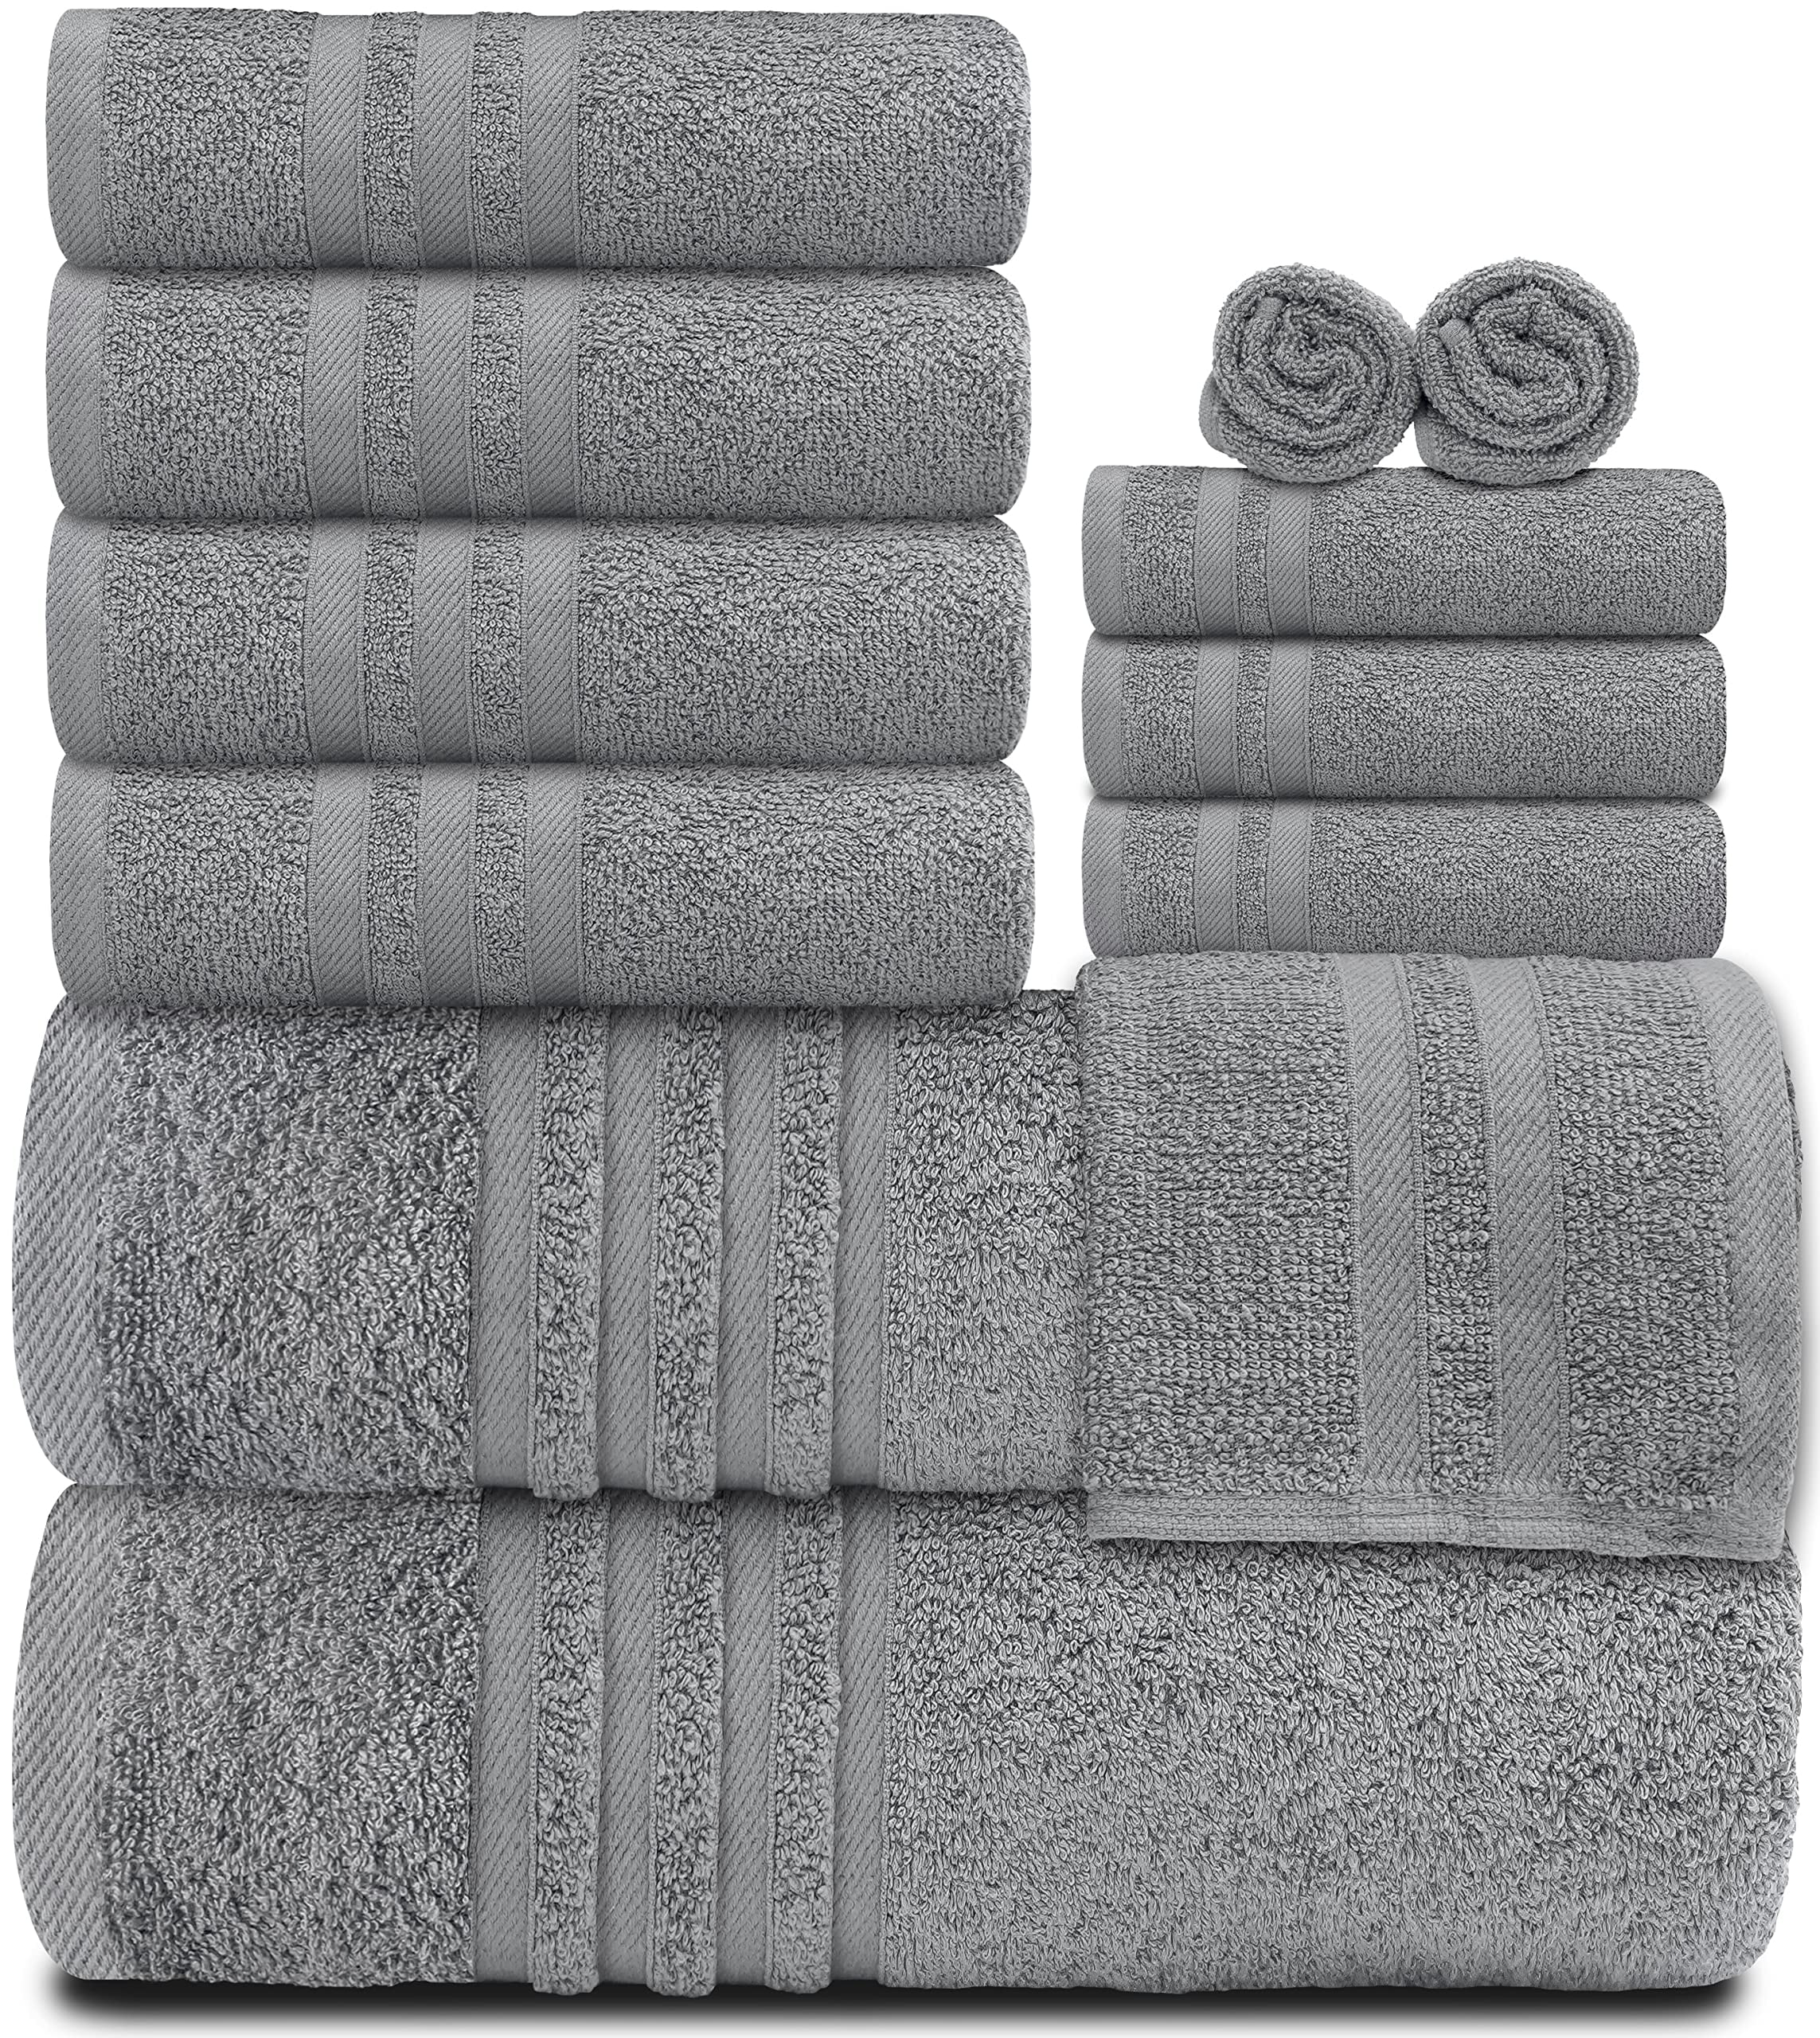 Wealuxe White Bath Towels 27x52 Inch, Cotton Towel Set for Bathroom, Hotel,  Gym, Spa, Soft Extra Absorbent Quick Dry 4 Pack - Yahoo Shopping